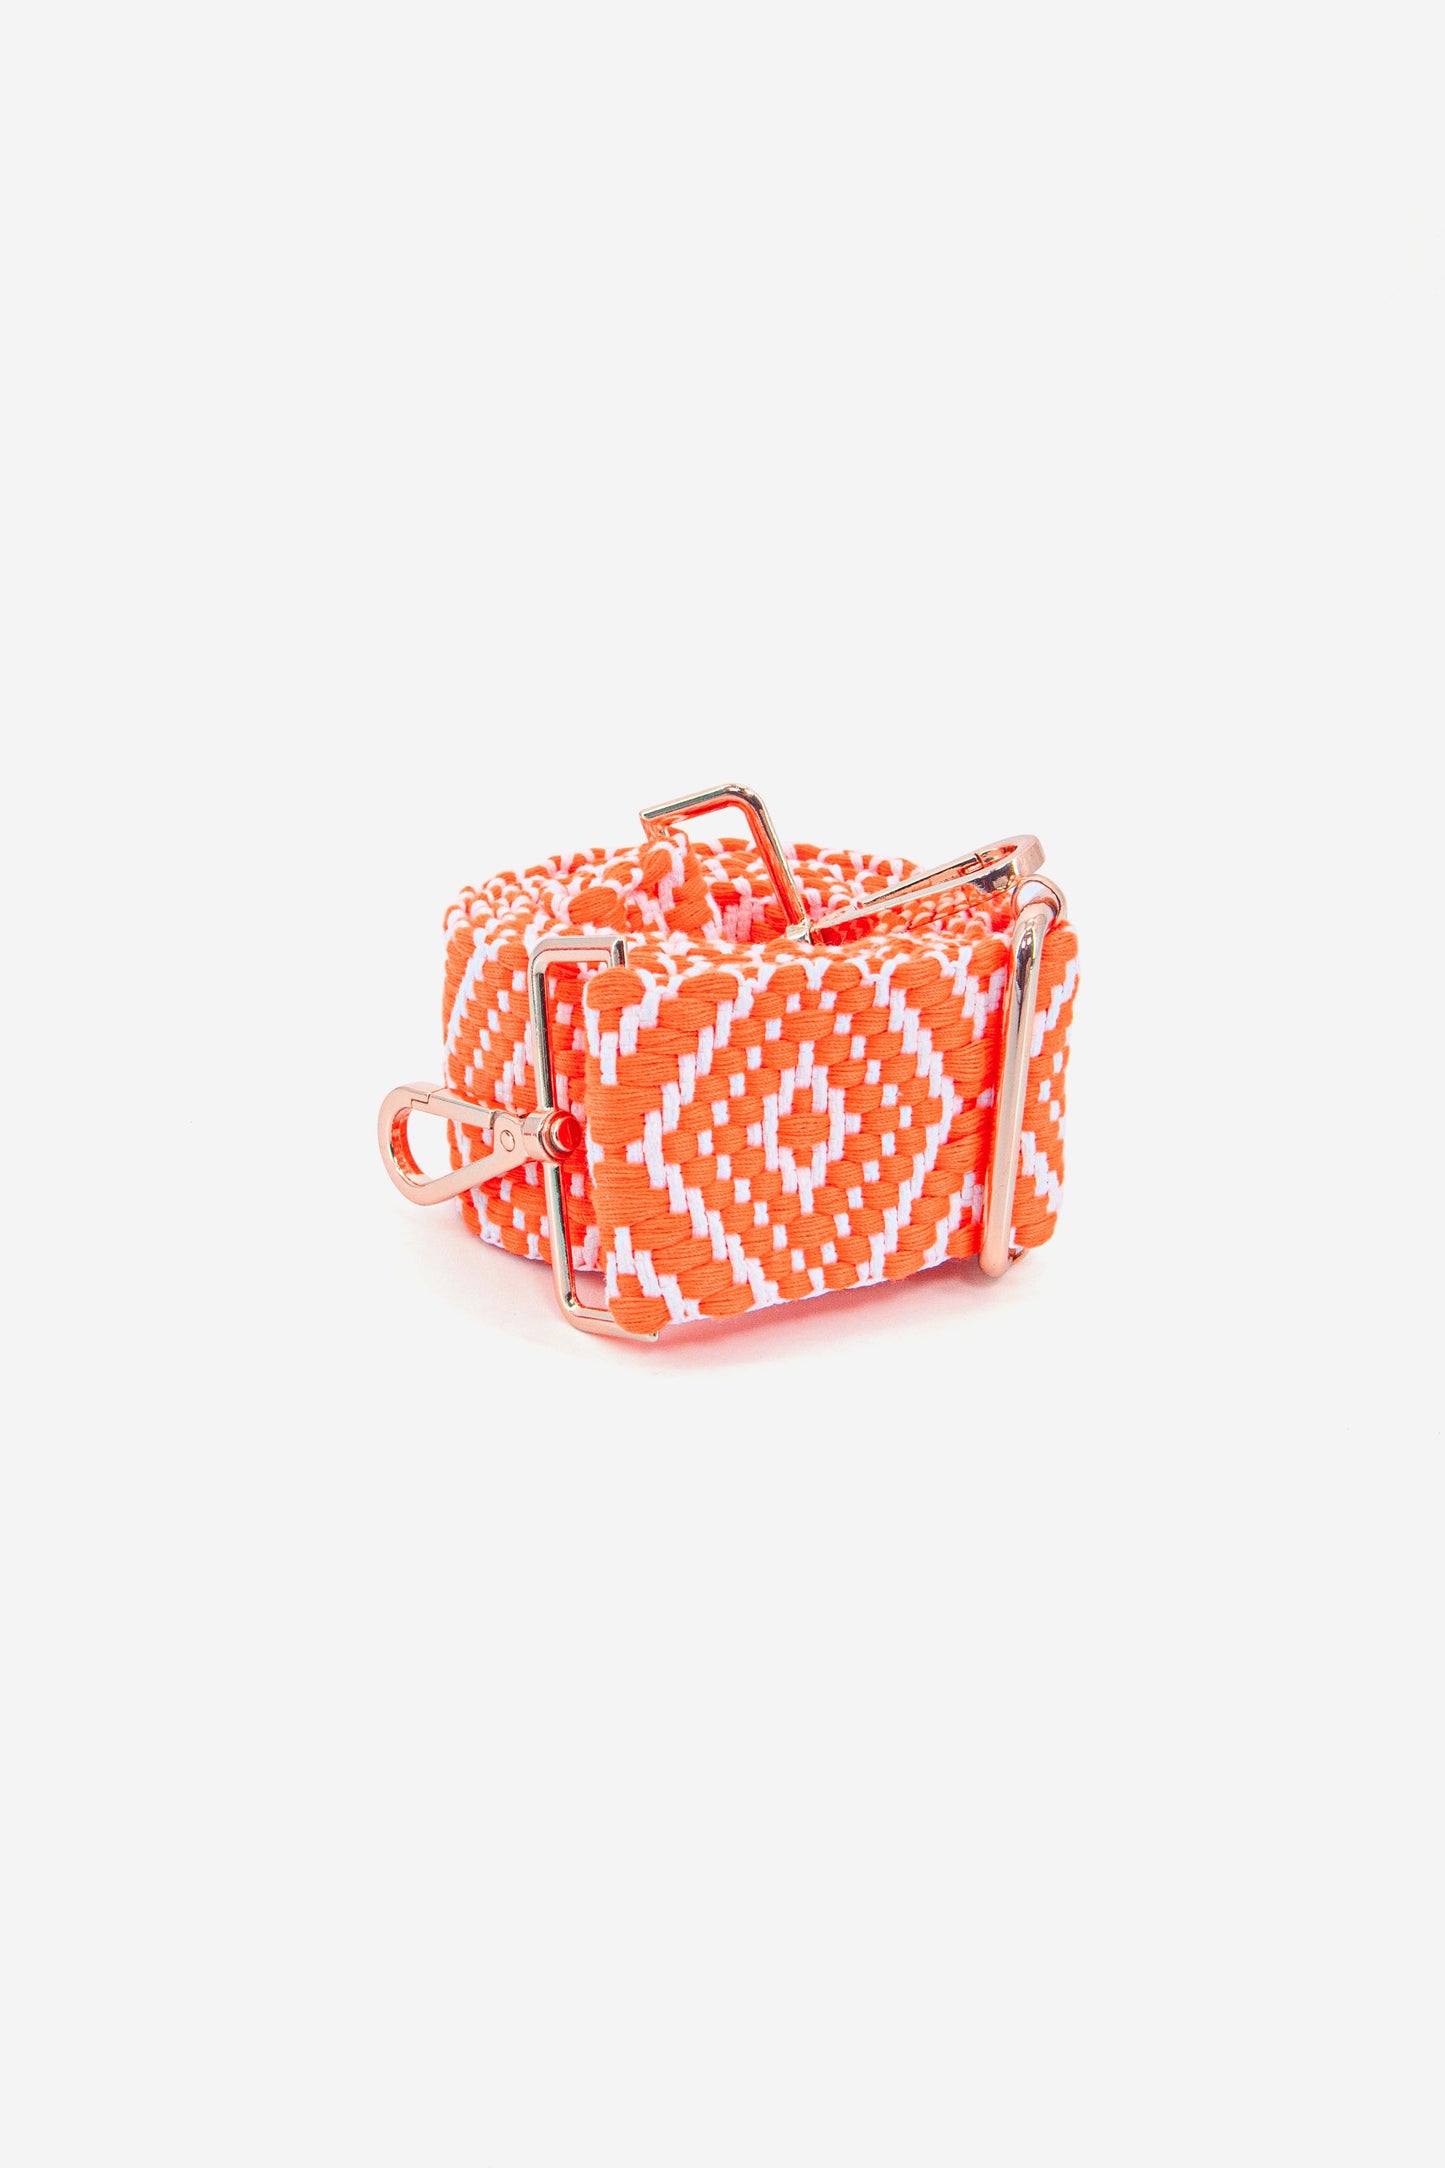 showing the bag strap curled up, highlighting the orange and white ikat pattern